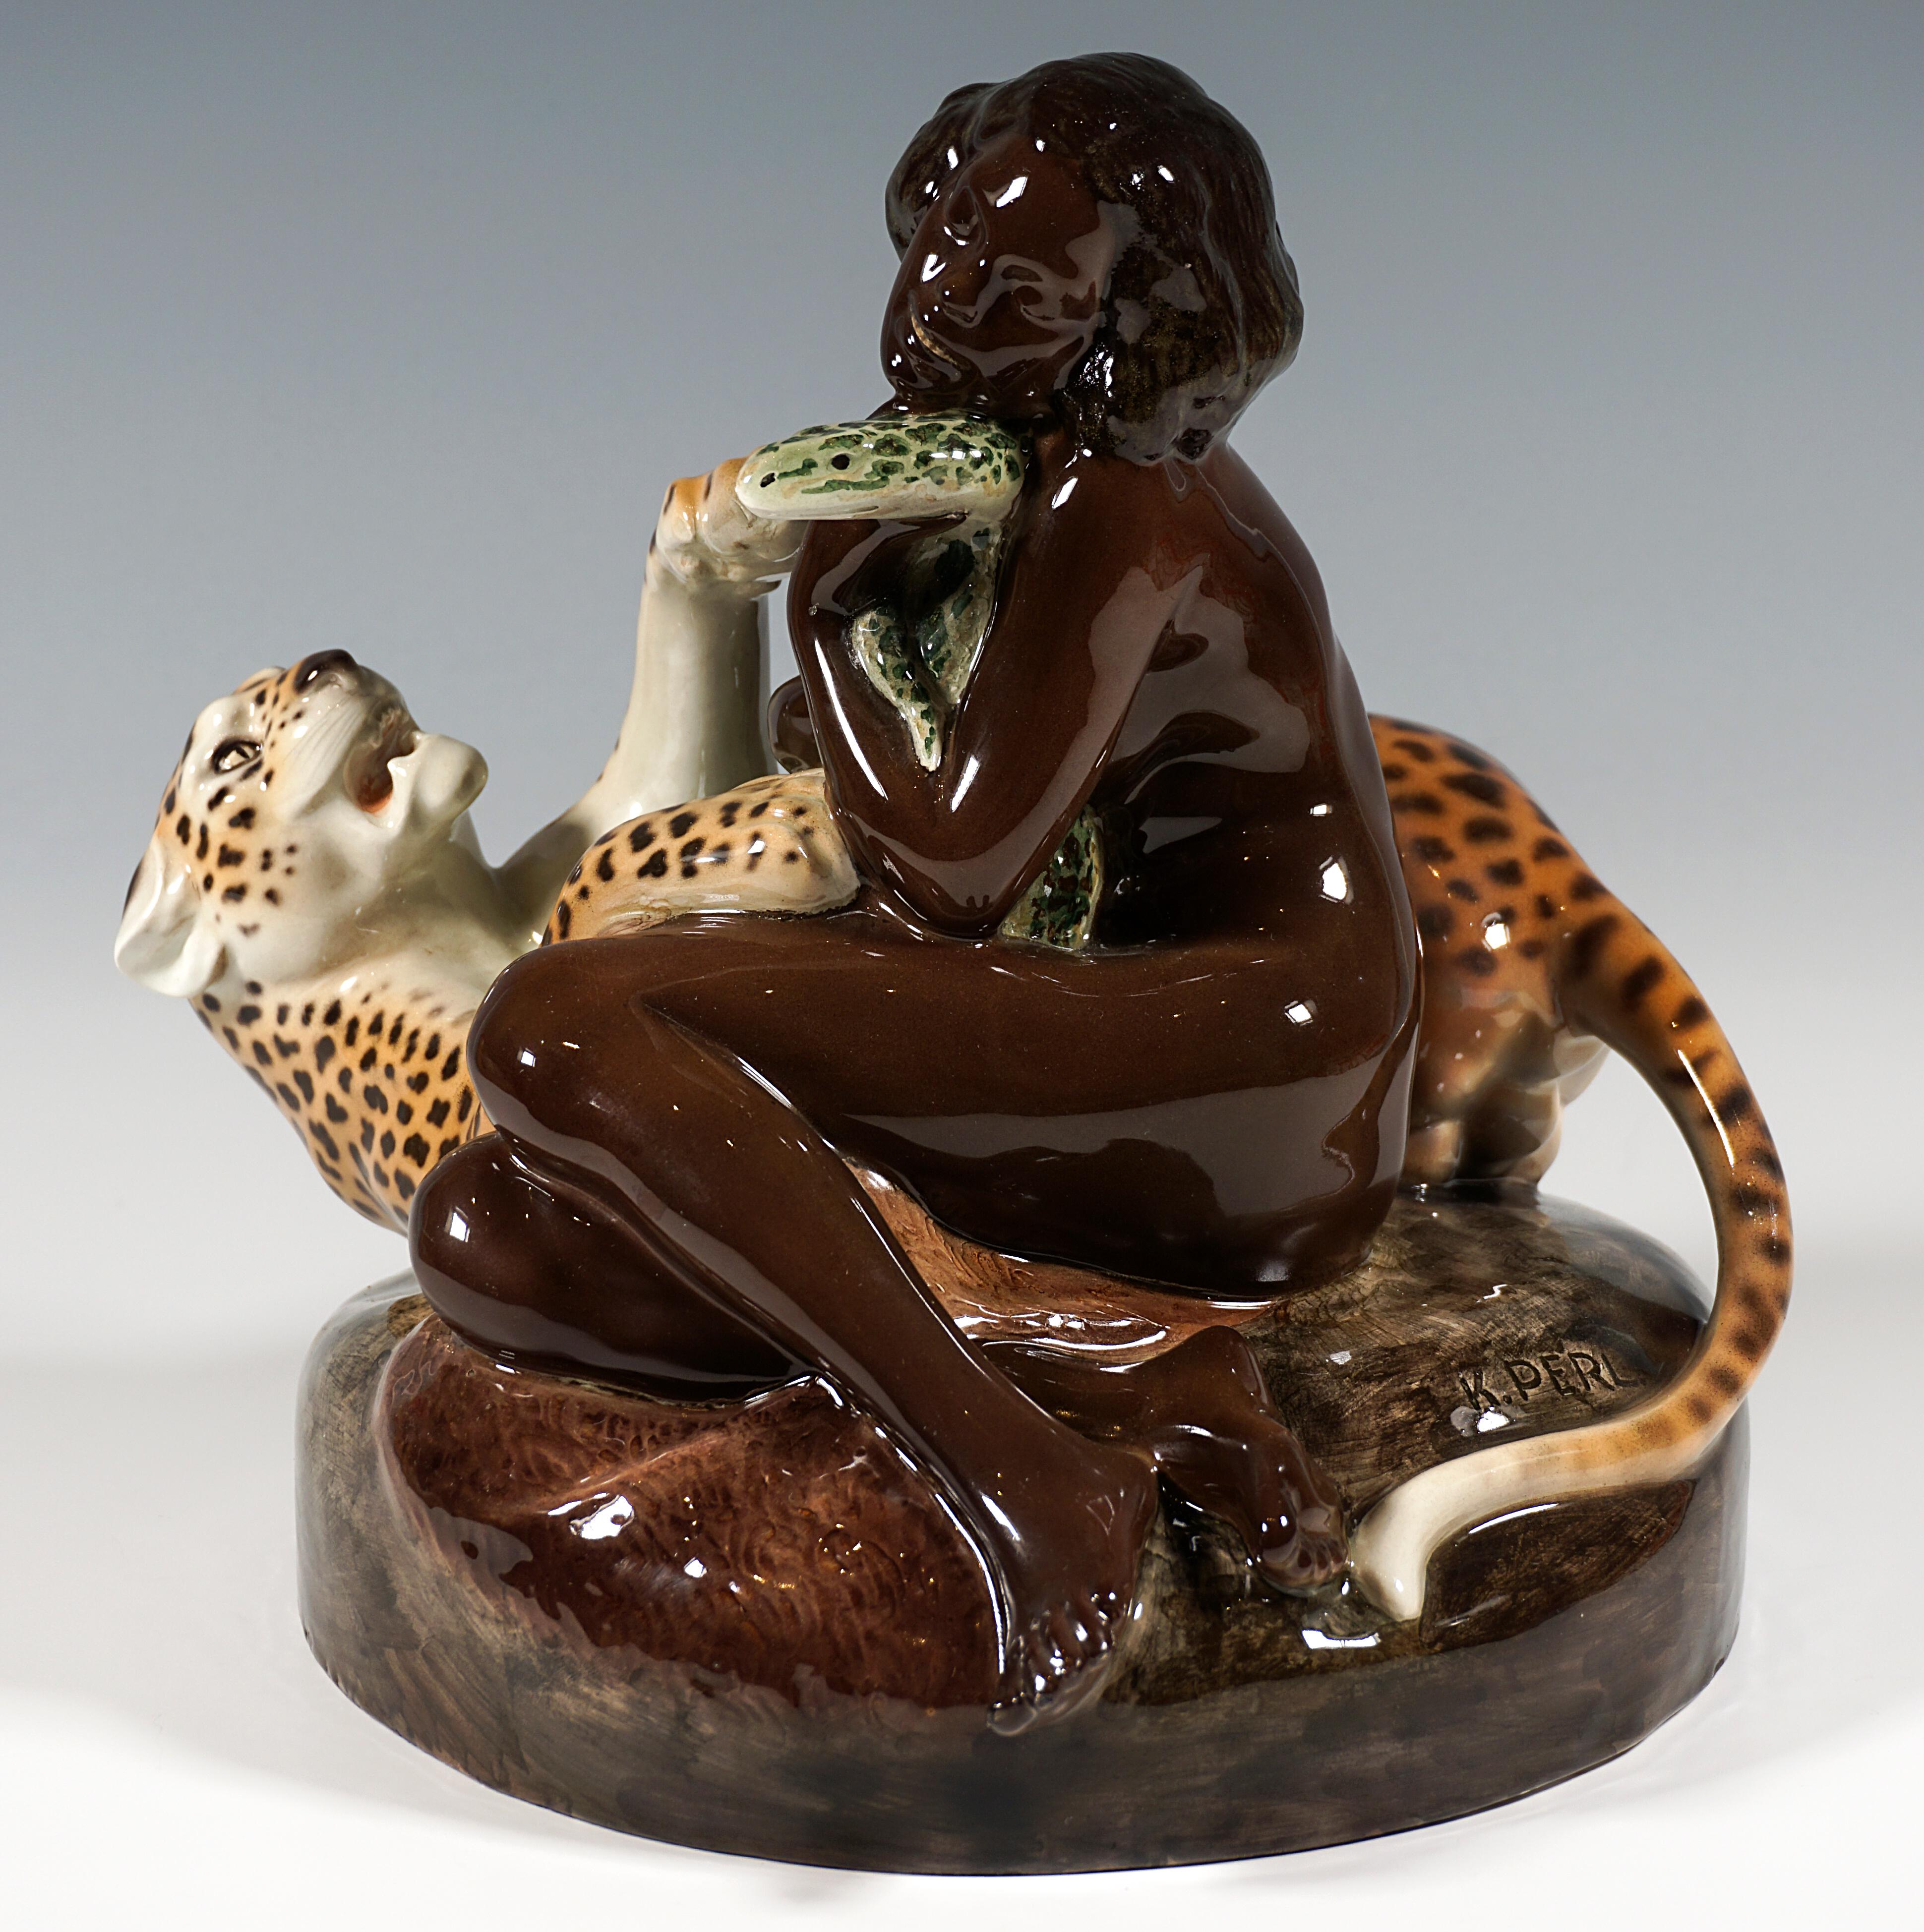 Rare and exceptional Goldscheider Art Déco ceramic group of the 1920s:
Unclothed woman sitting sideways on a rock, leaning against a leopard, which playfully winds around her on the ground and turns towards her, a large twisted snake lying on the